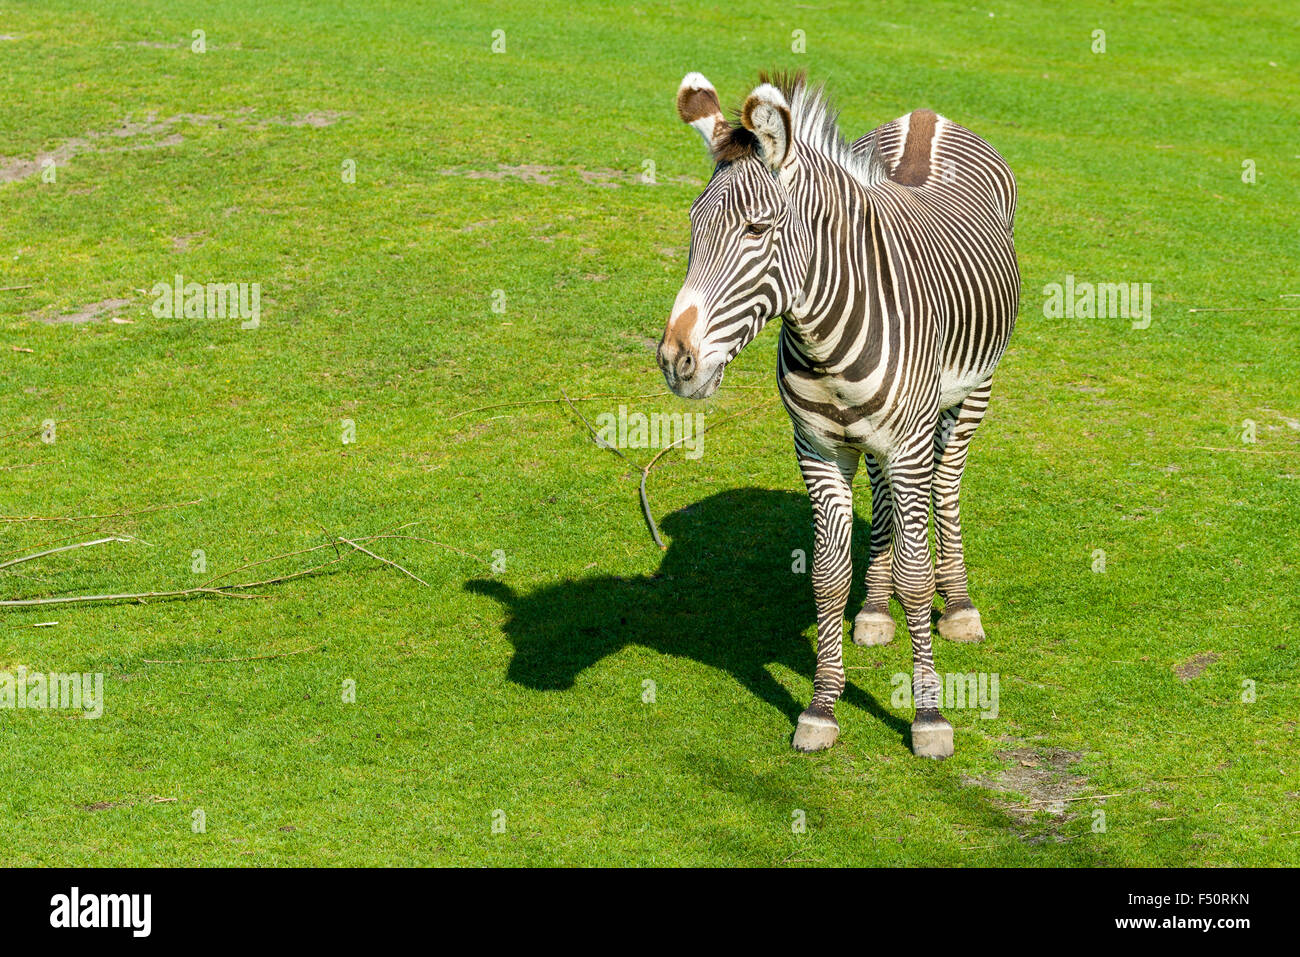 A Grevy's Zebra (Equus grevyi), standing on a meadow Stock Photo